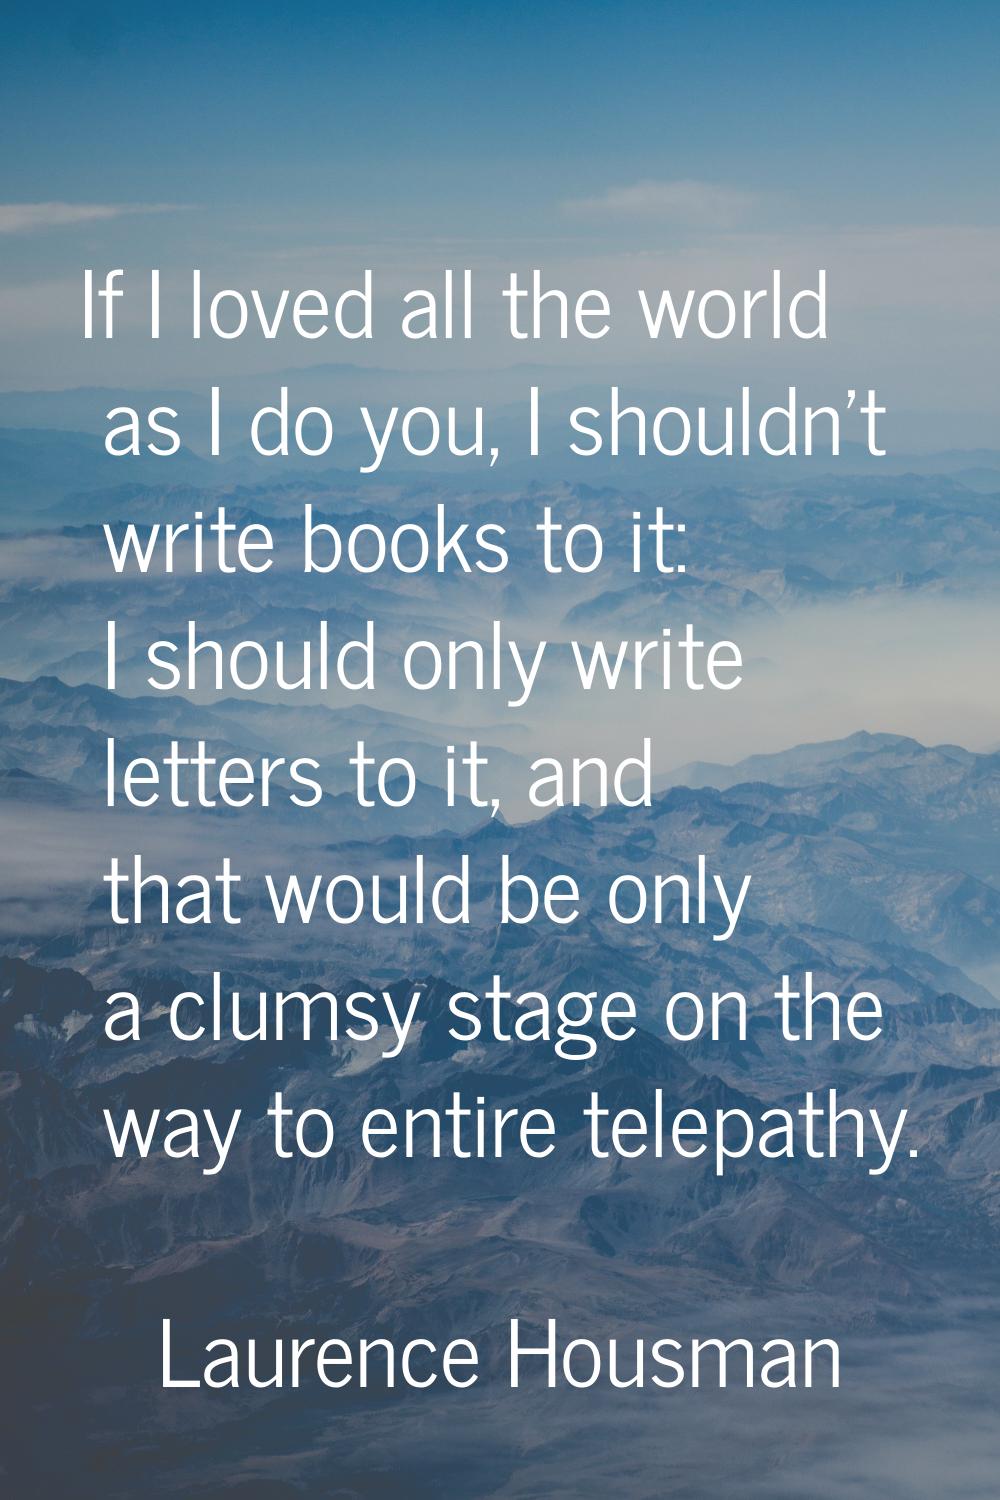 If I loved all the world as I do you, I shouldn't write books to it: I should only write letters to